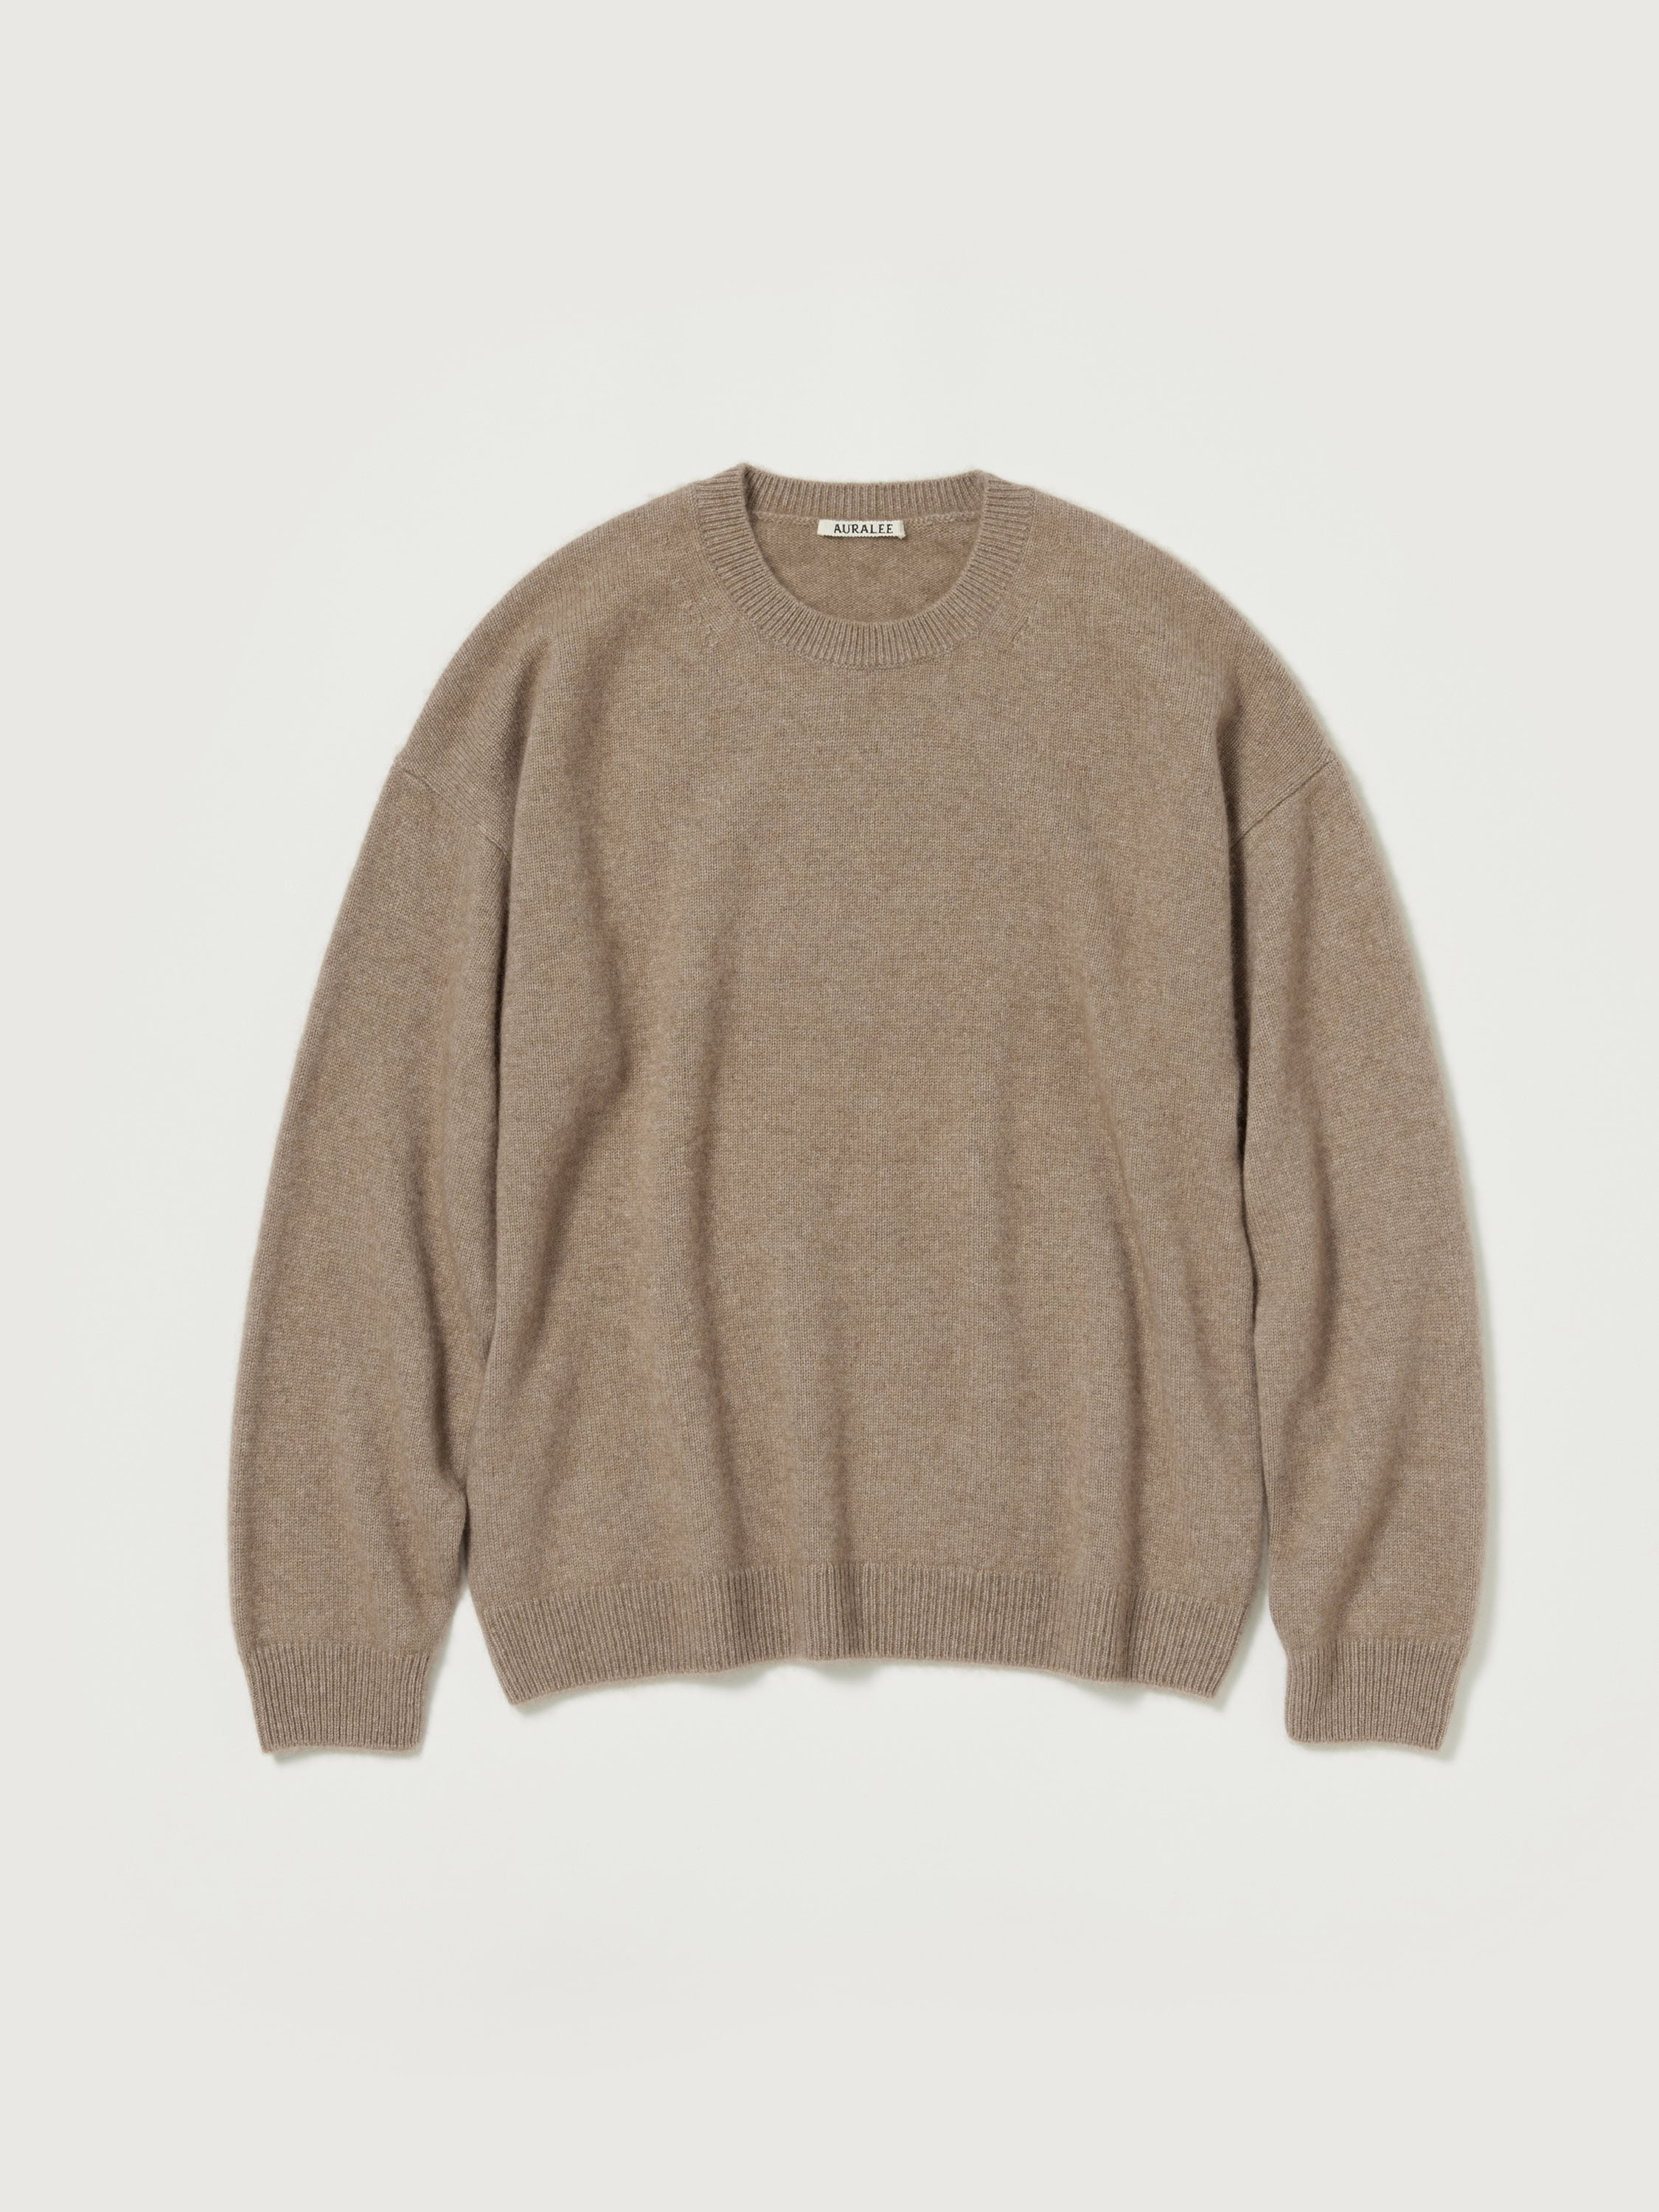 BABY CASHMERE KNIT P/O 詳細画像 NATURAL BROWN 1